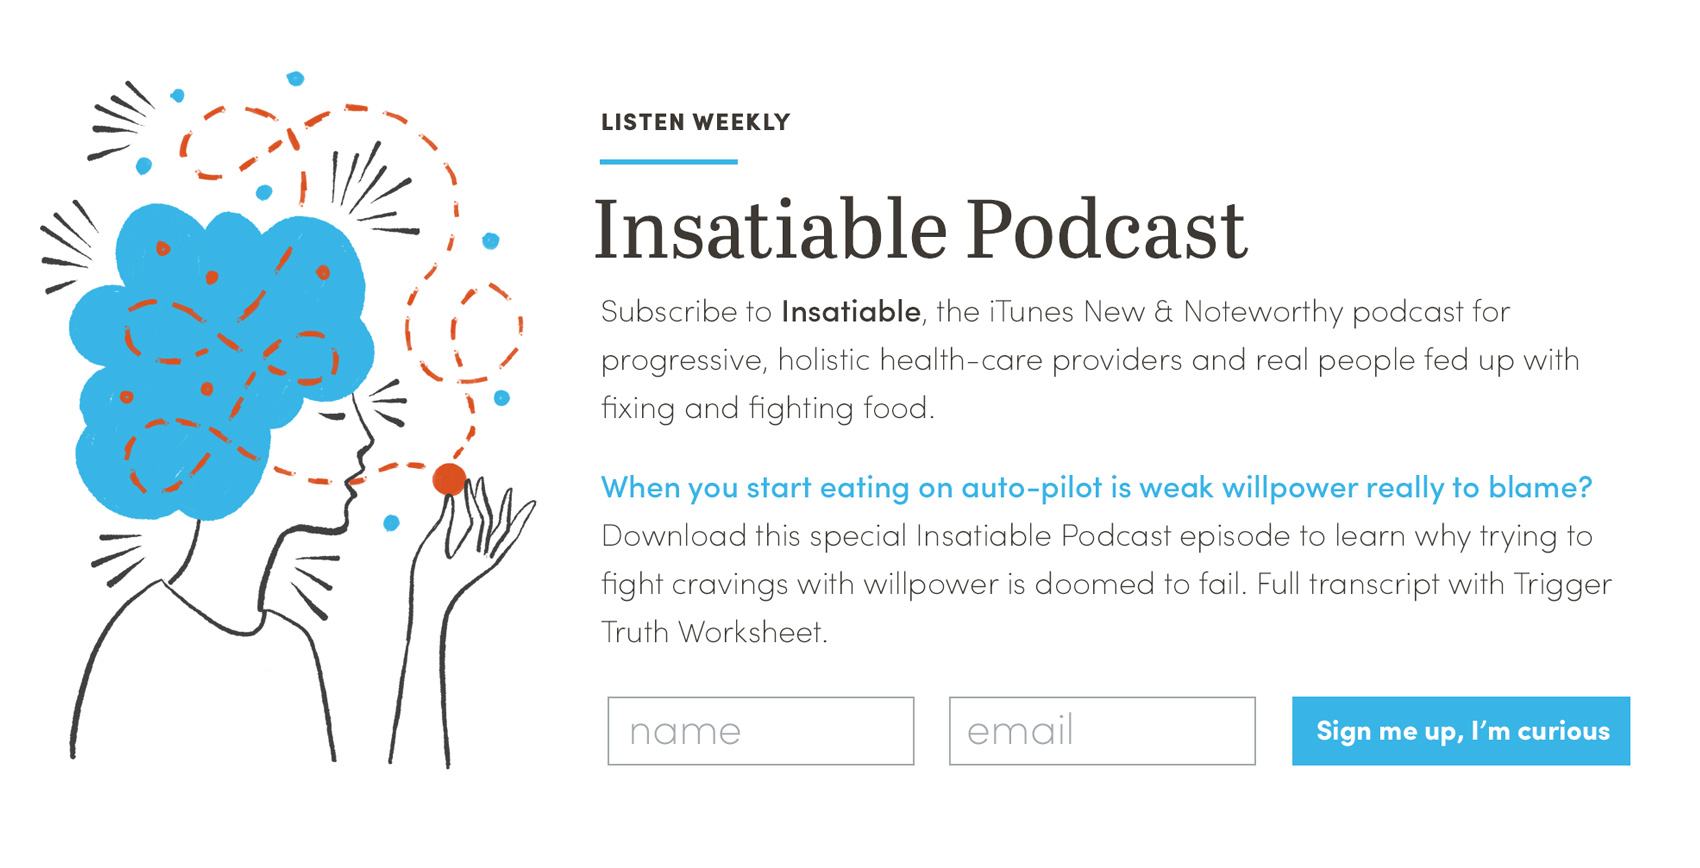 Insatiable Podcast blurb with illustration of a woman eating and thinking about eating.